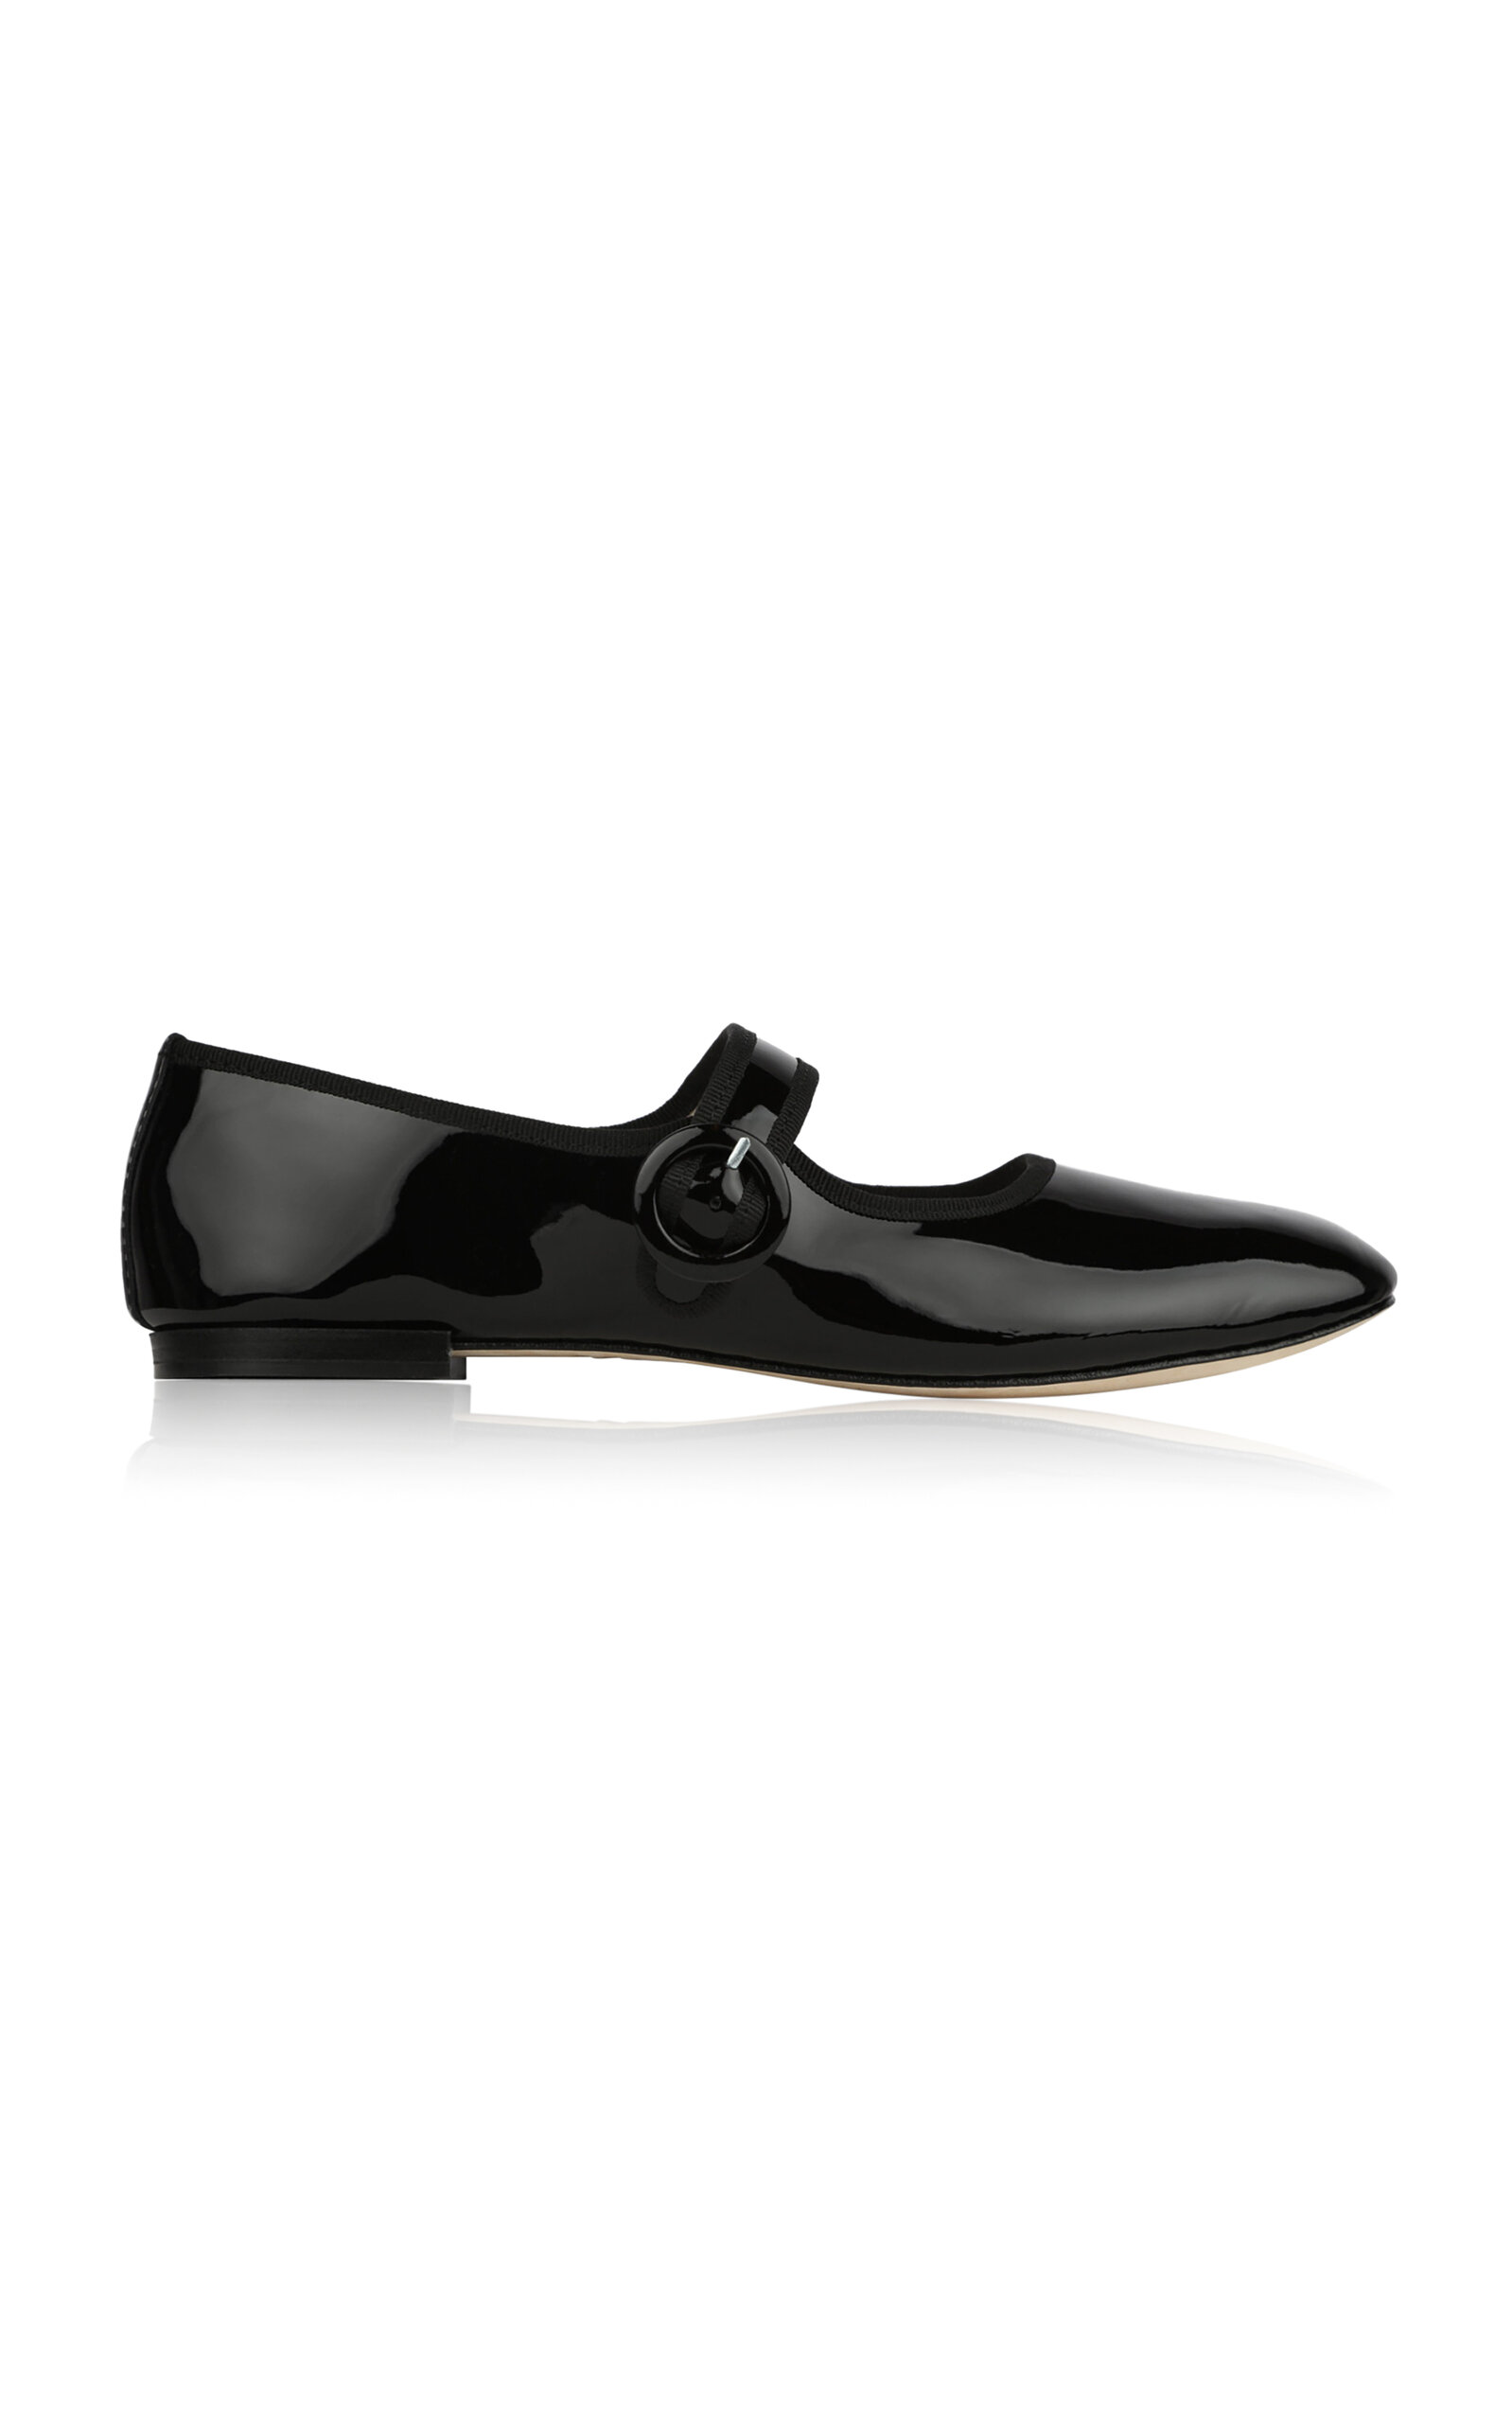 REPETTO GEORGIA PATENT LEATHER MARY JANE FLATS